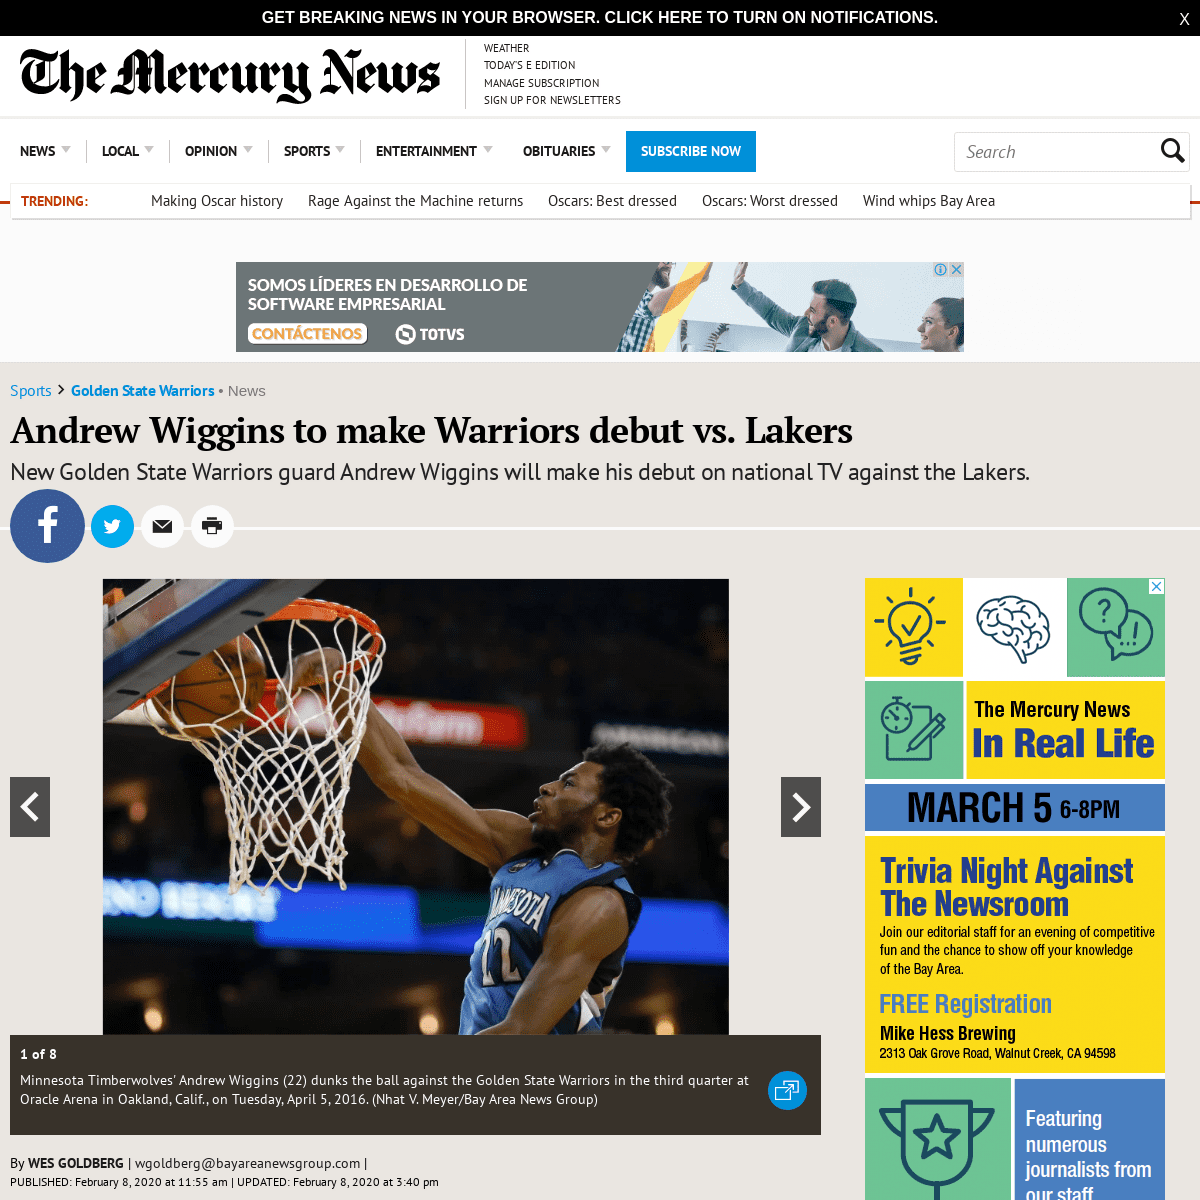 A complete backup of www.mercurynews.com/andrew-wiggins-to-make-warriors-debut-vs-lakers